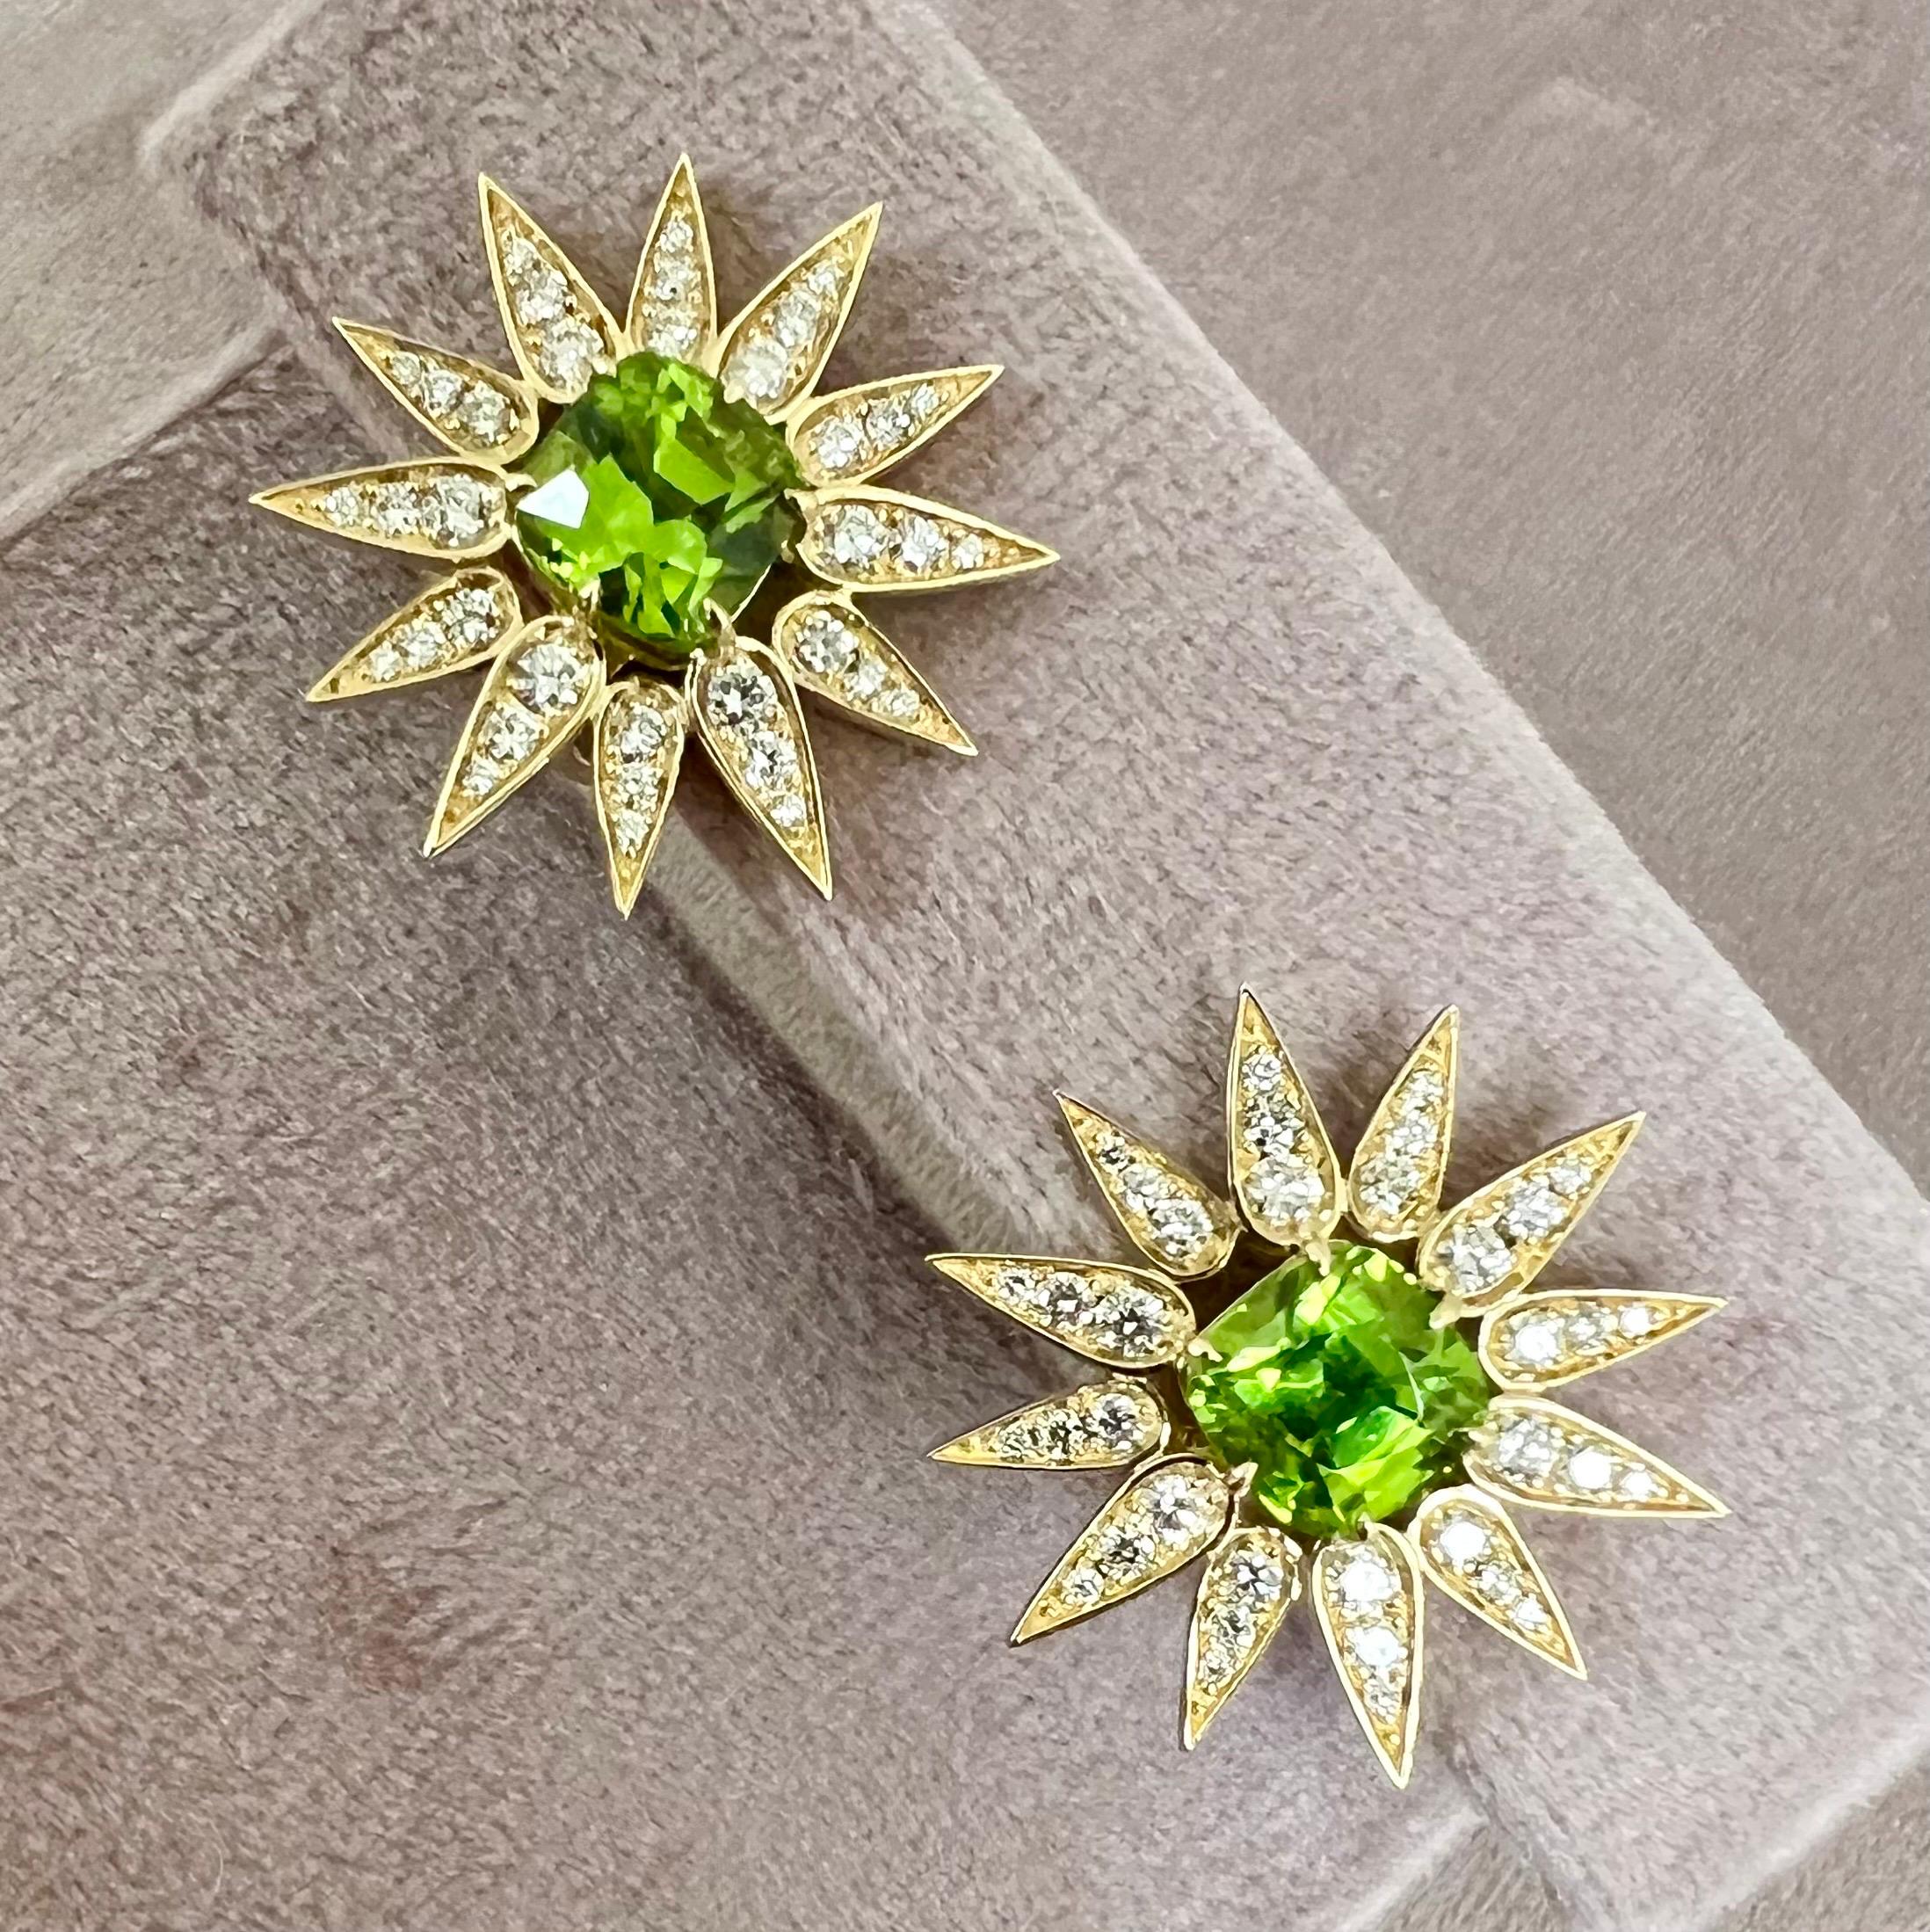 Created in 18 karat yellow gold
Peridot 3 carats approx.
Diamonds 1.0 carat approx.
Omega clip-backs & posts
Limited Edition

Forged from 18 karat yellow gold, these limited edition earrings feature an approximate 3 carat Peridot and 1.0 carat